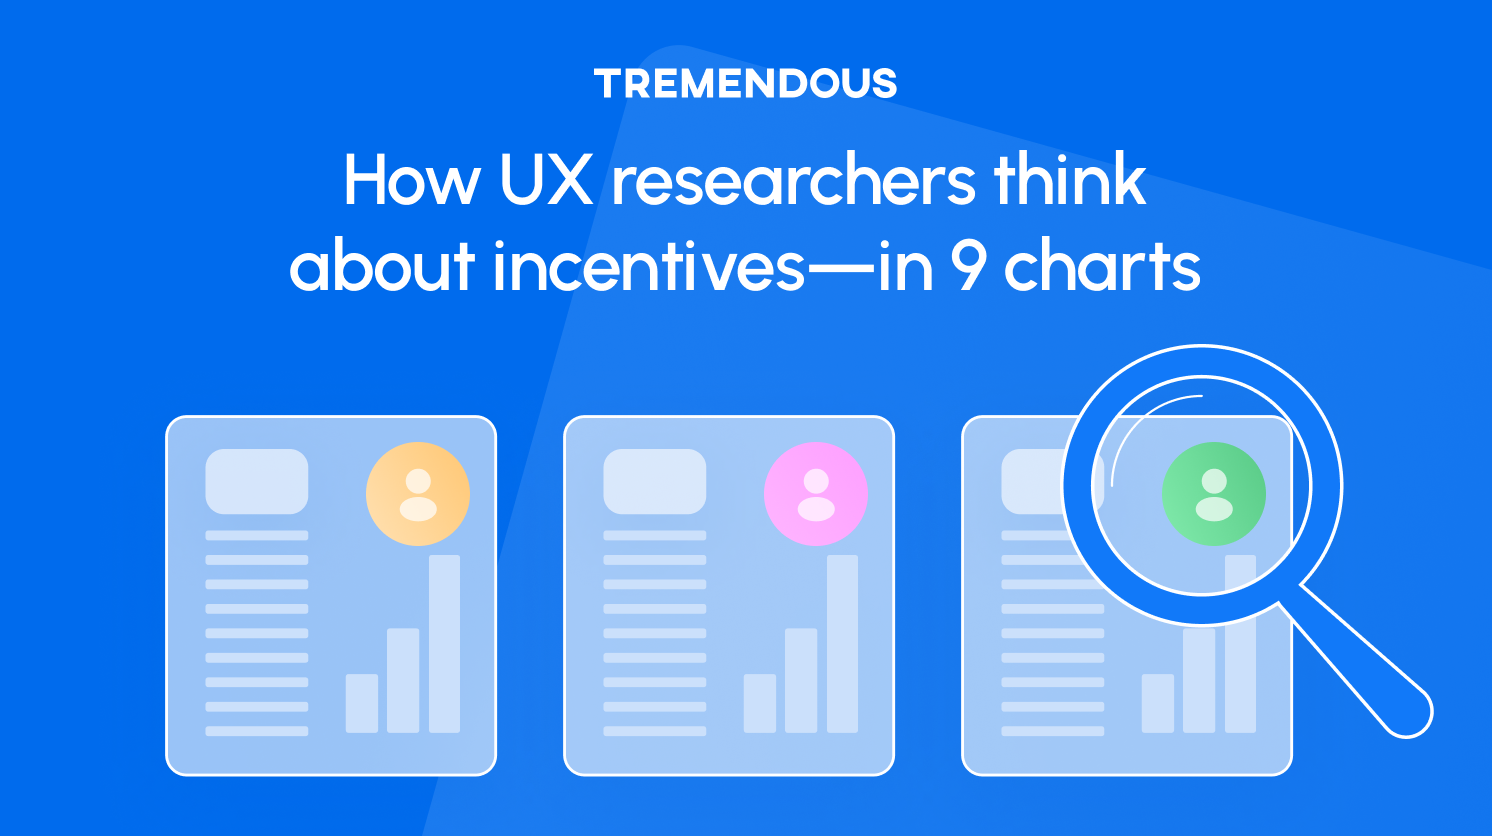 How UX researchers approach incentives—in 9 charts